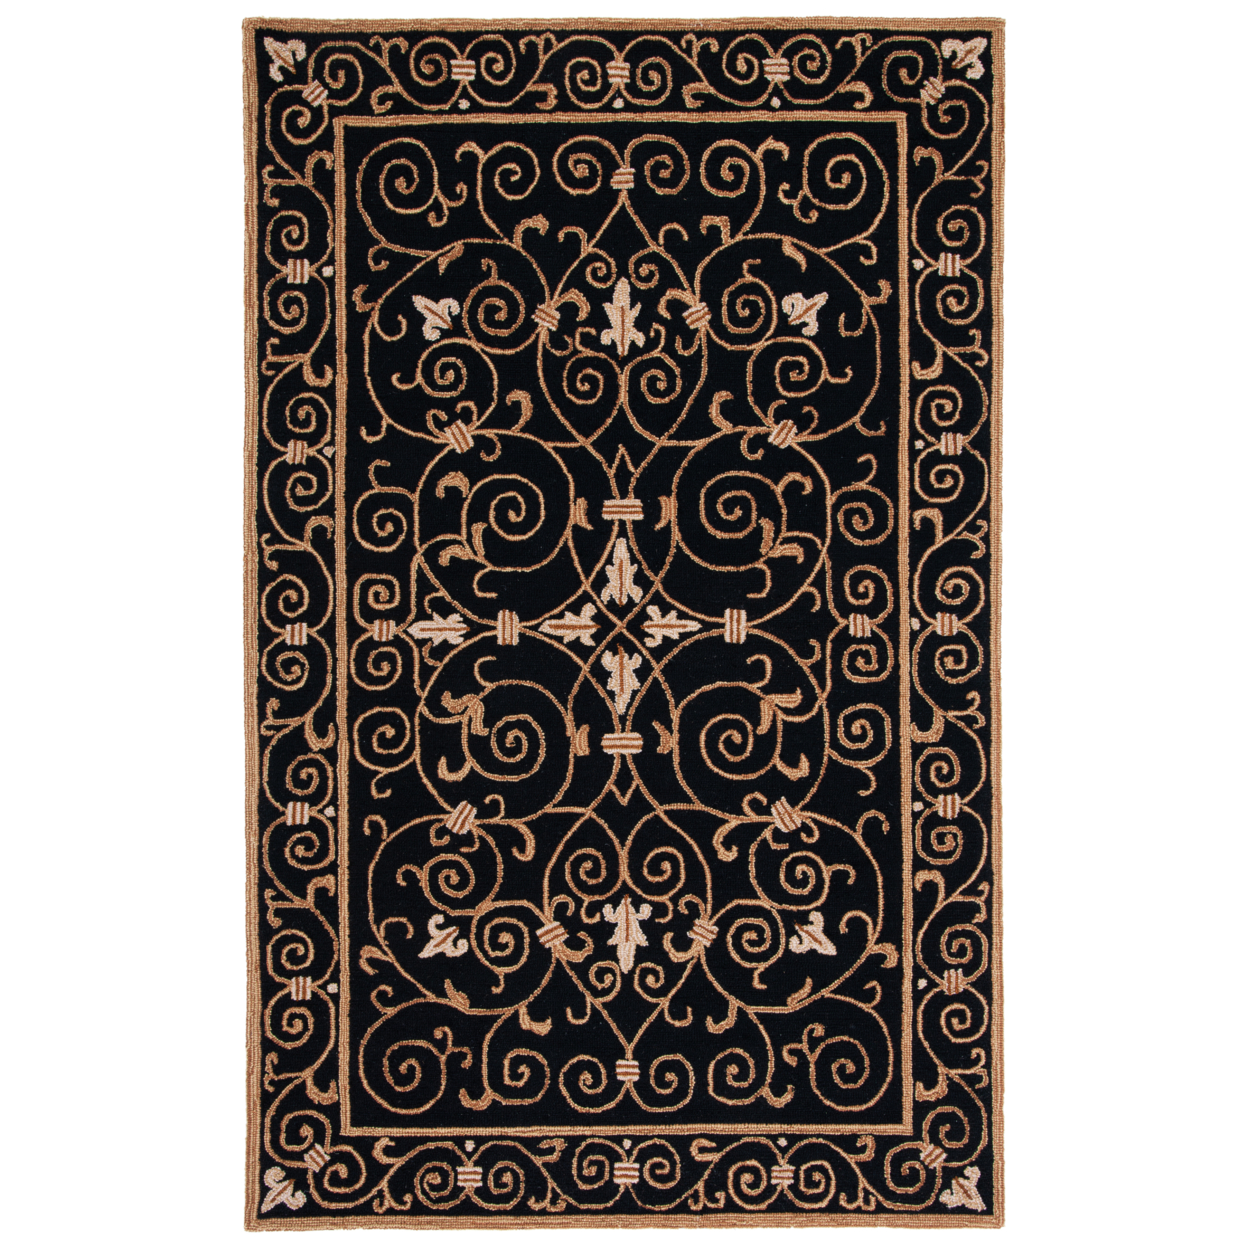 SAFAVIEH Chelsea Collection HK11A Hand-hooked Black Rug - 8' 9 X 11' 9